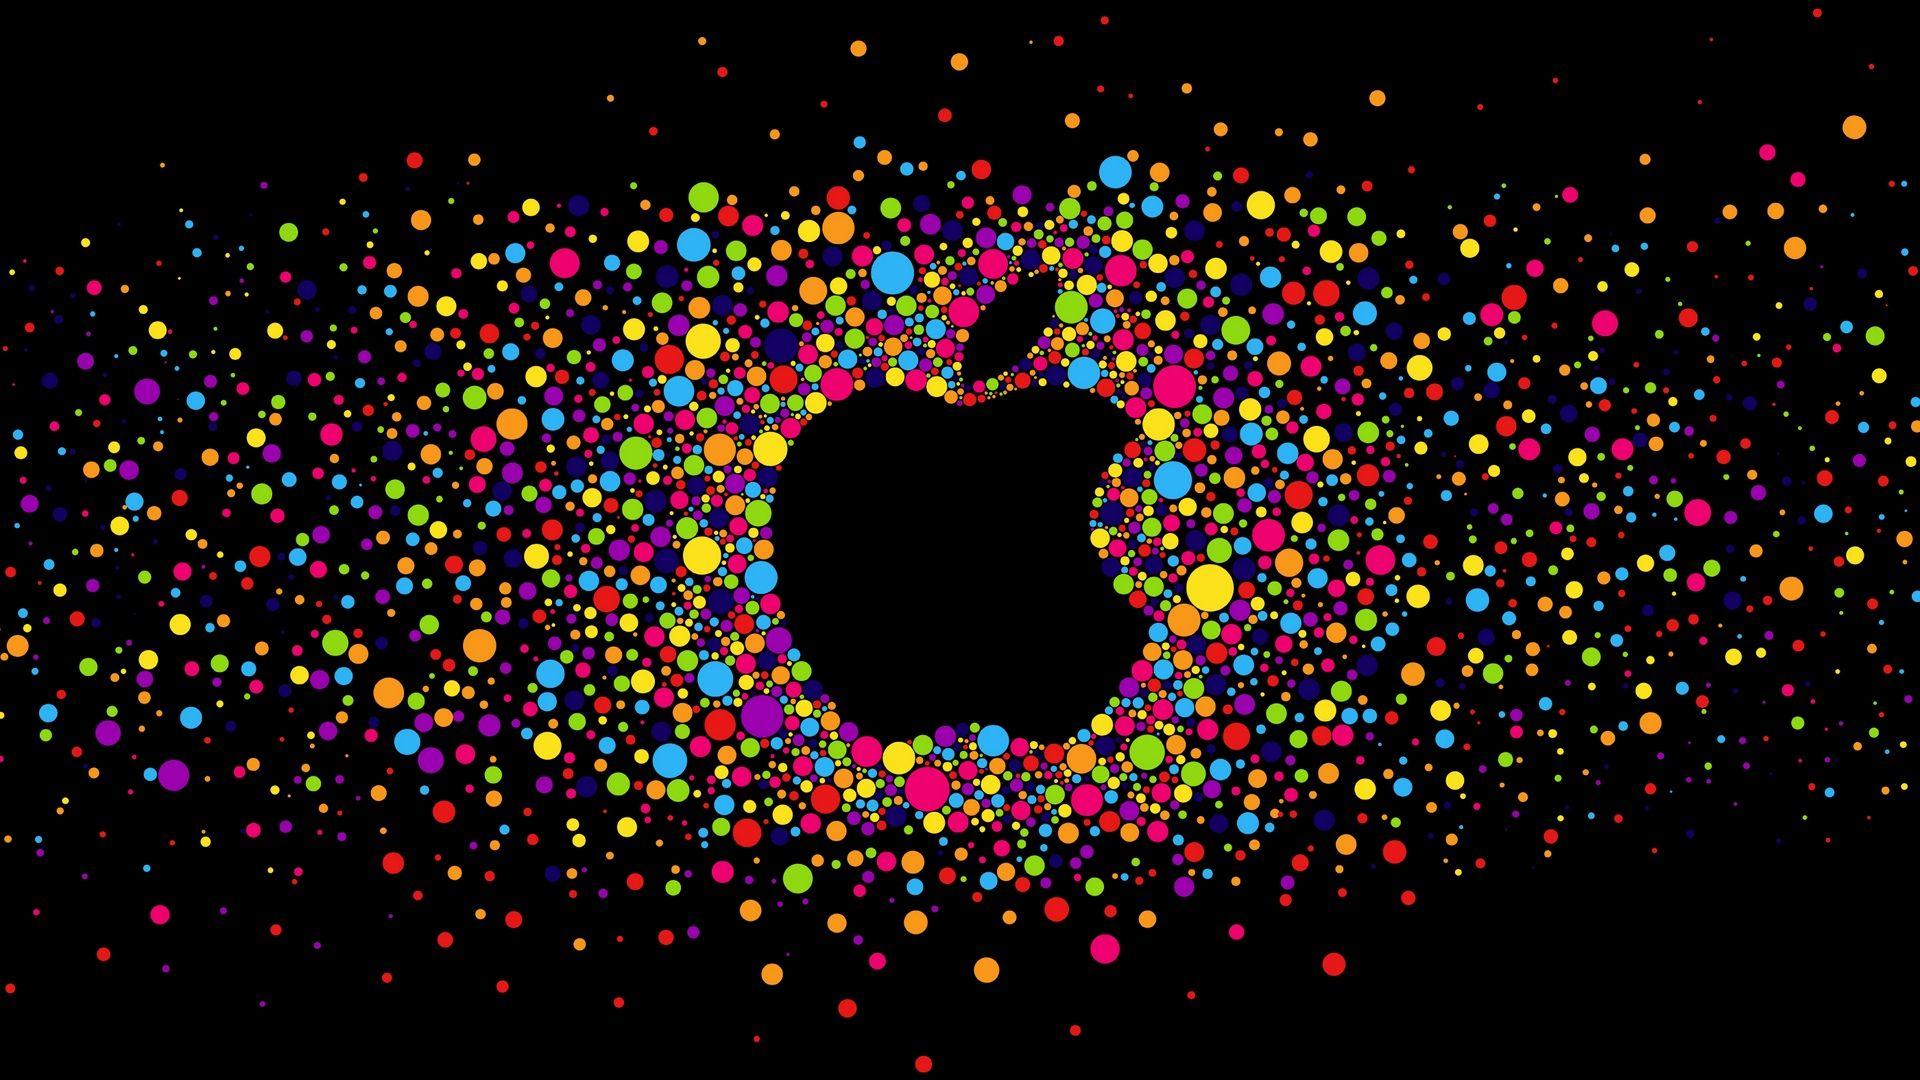 Colorful Apple Logo - Colorful Circles with Black Background and Apple Logo Wallpaper